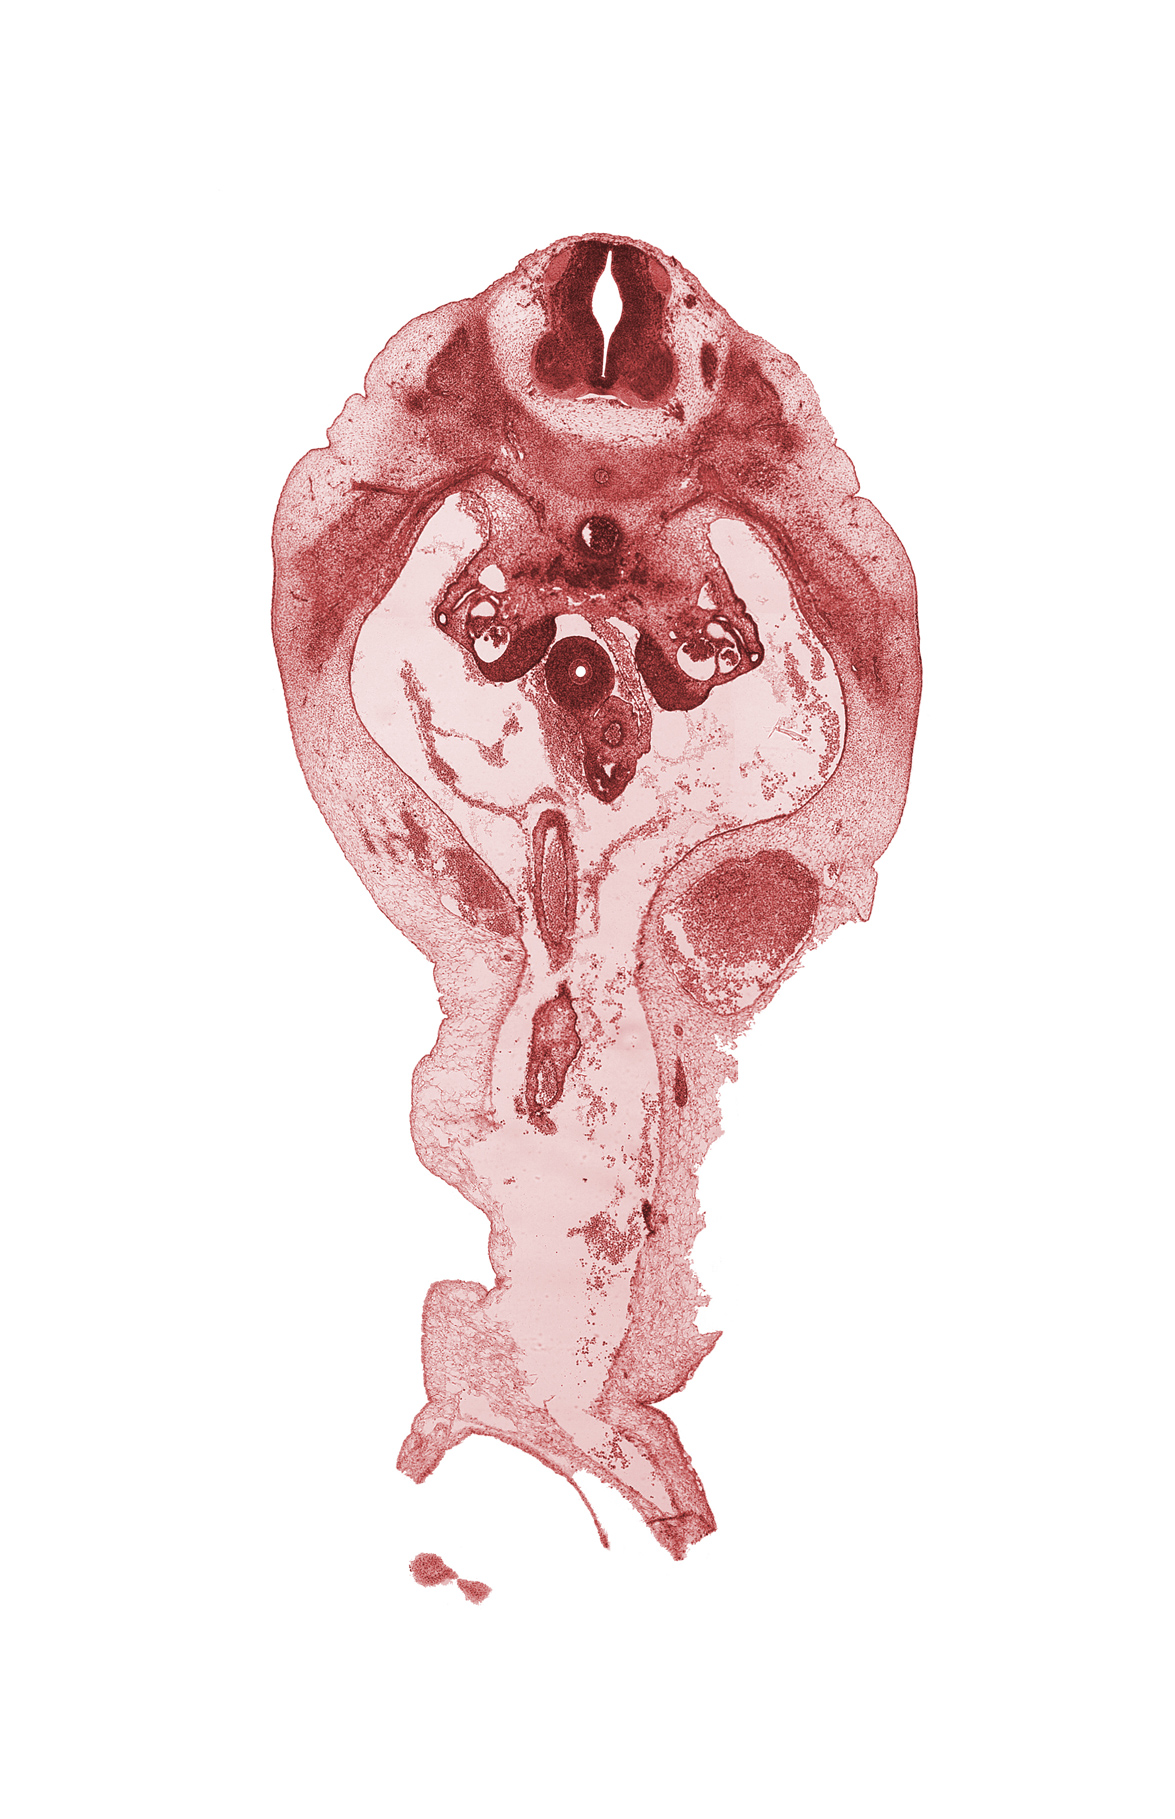 T-12 spinal ganglion, central canal of spinal cord, communicating ramus, duodenum, neural arch, peritoneal cavity, subcostal nerve (T-12), superior mesenteric artery, superior mesenteric vein, umbilical coelom, umbilical vein